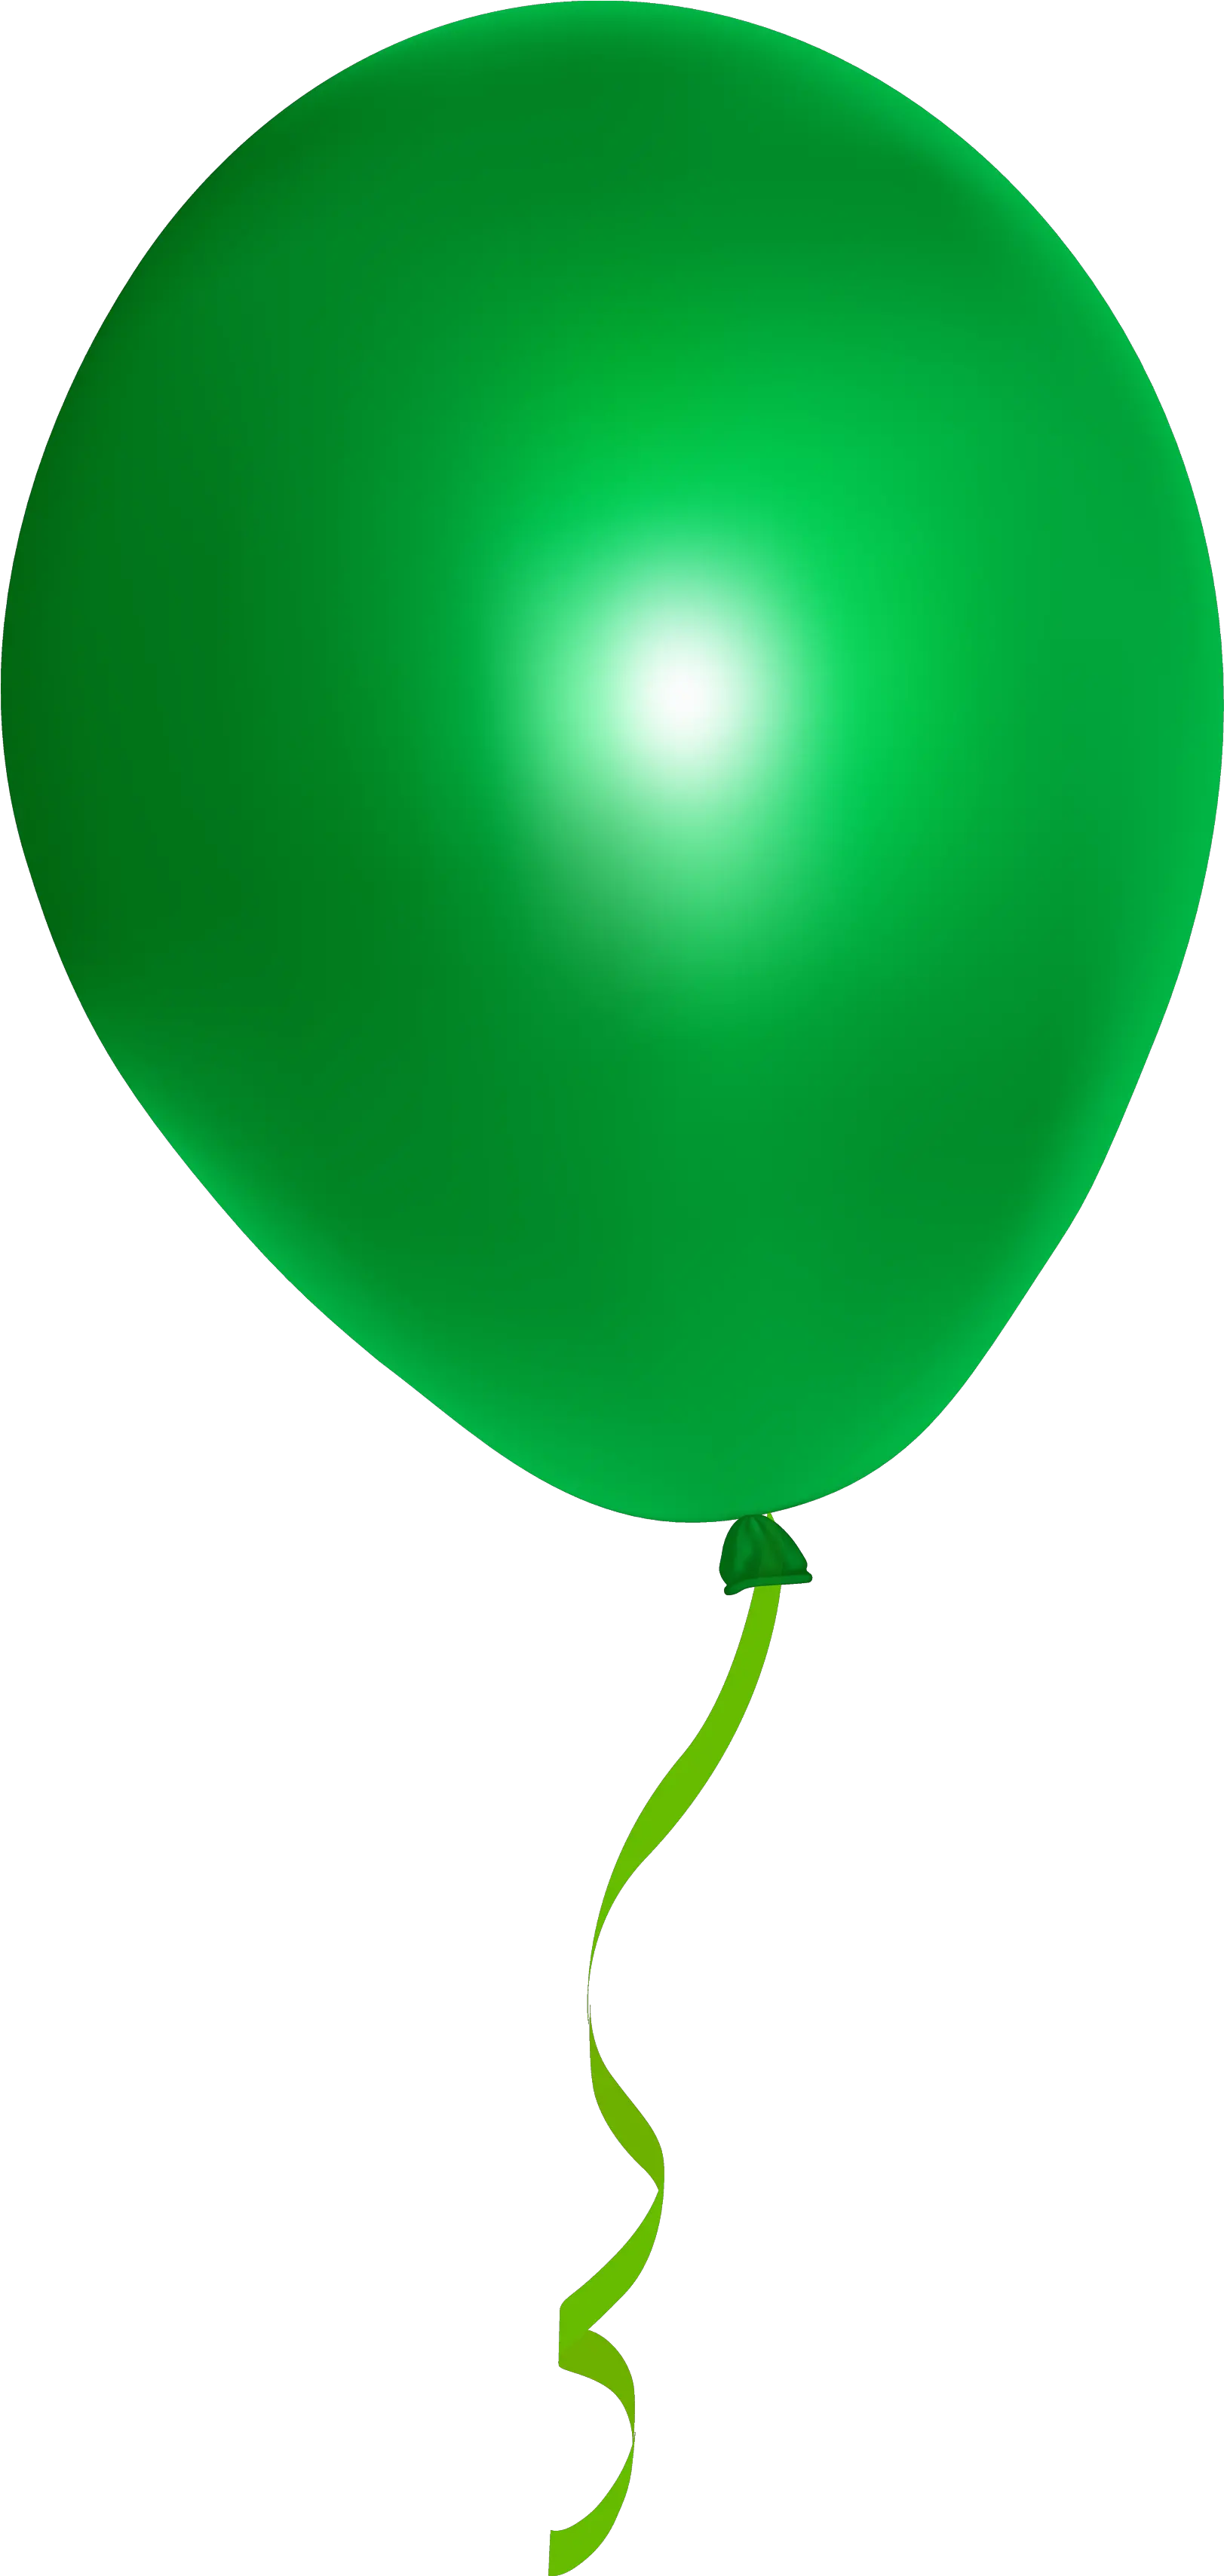 Green Balloon Png Image Transparent Background Green Balloon Png Ballon Png